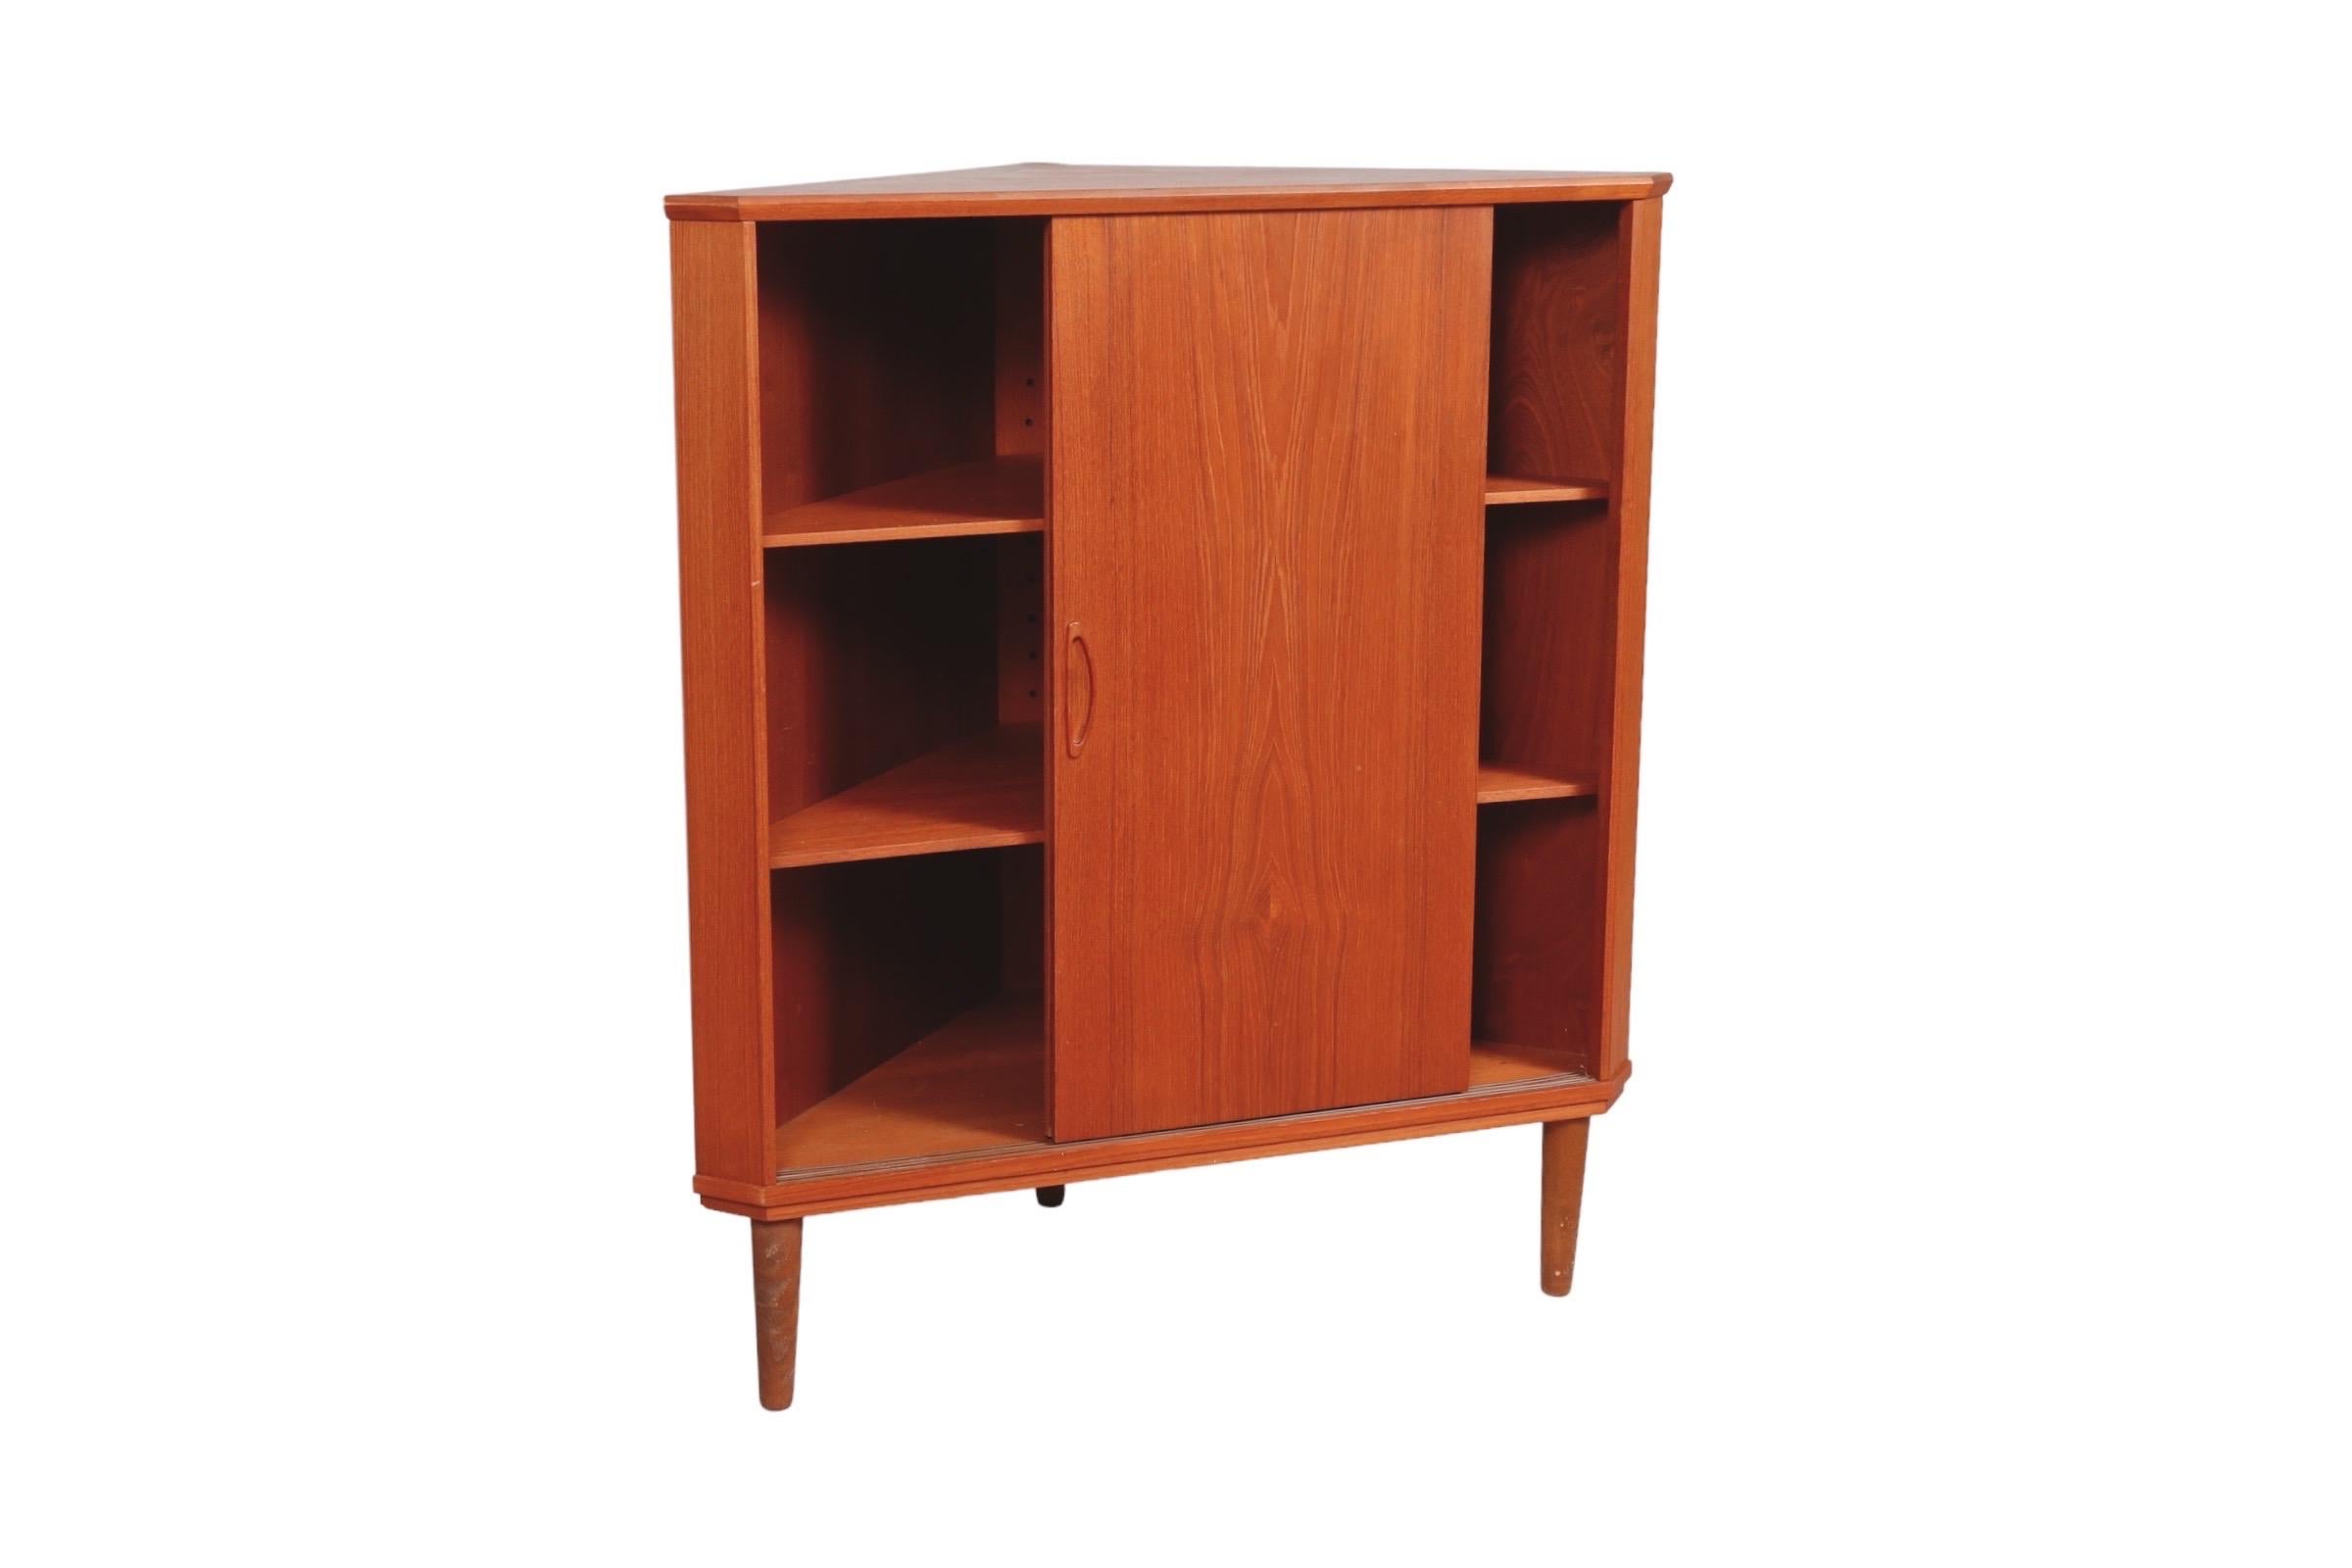 A tall mid century corner cabinet made of teak. Two adjustable shelves are housed behind two sliding cabinet doors with recessed handles. Stands on three round tapered legs.